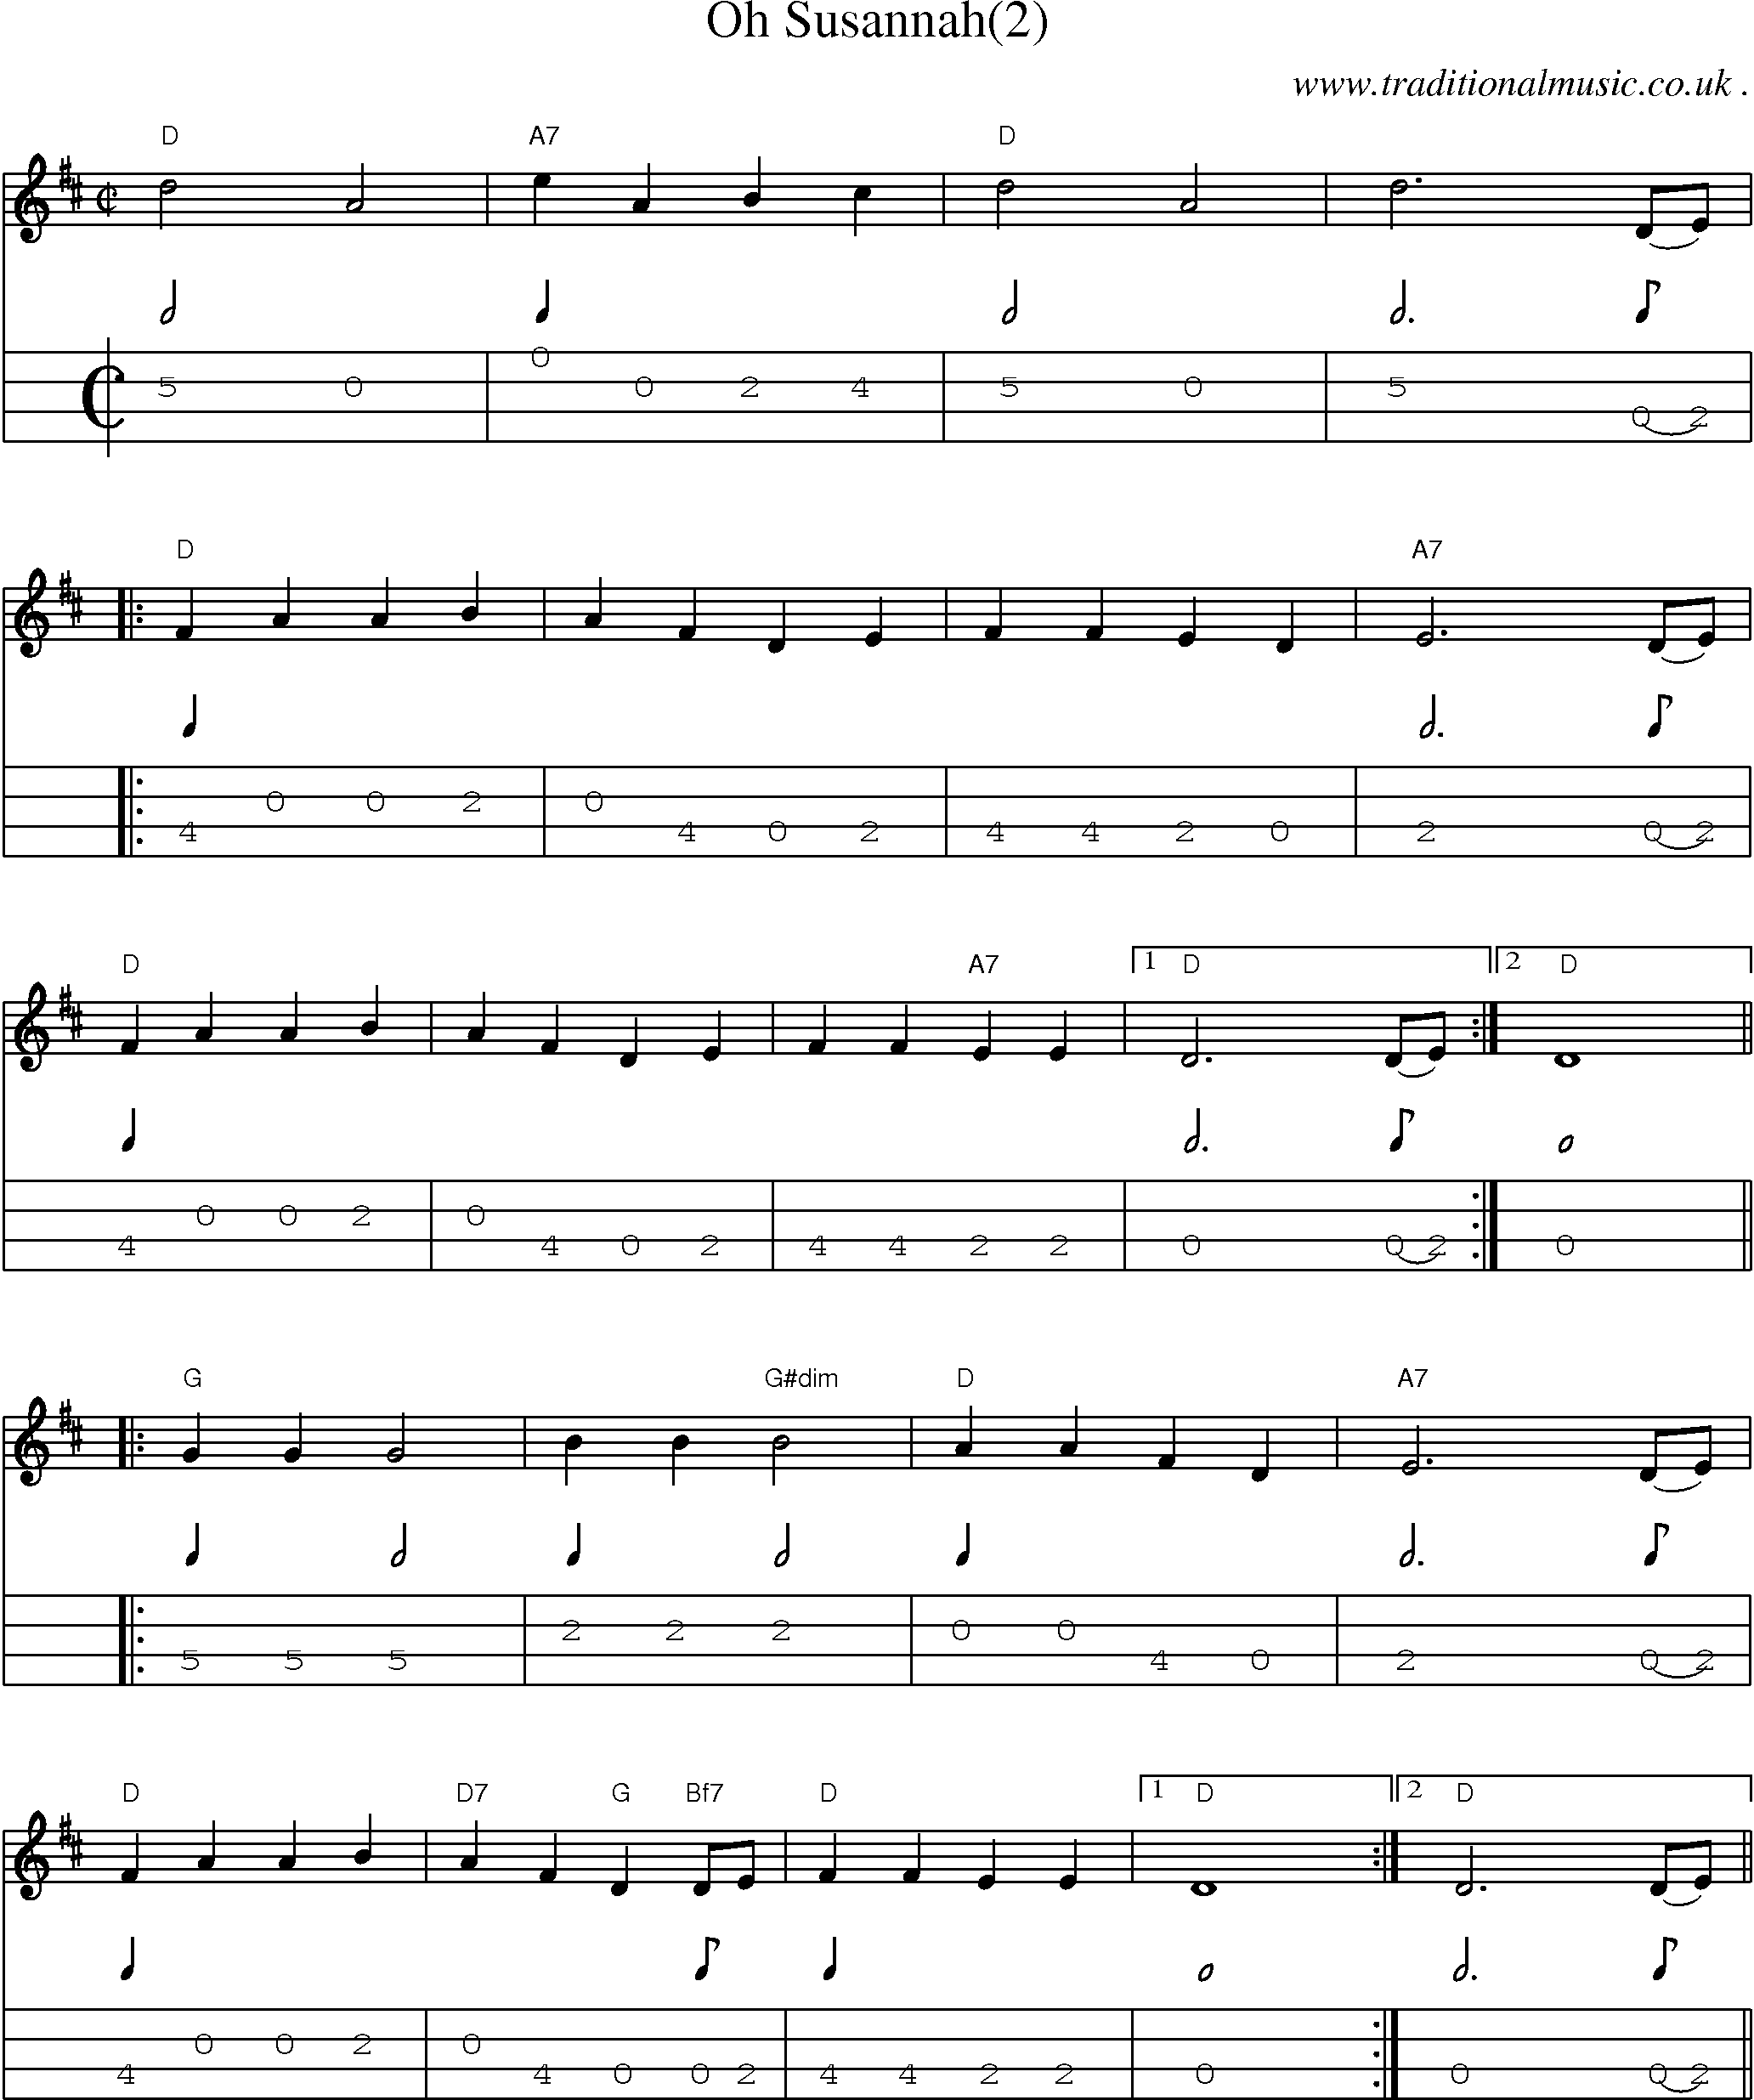 Music Score and Mandolin Tabs for Oh Susannah(2)